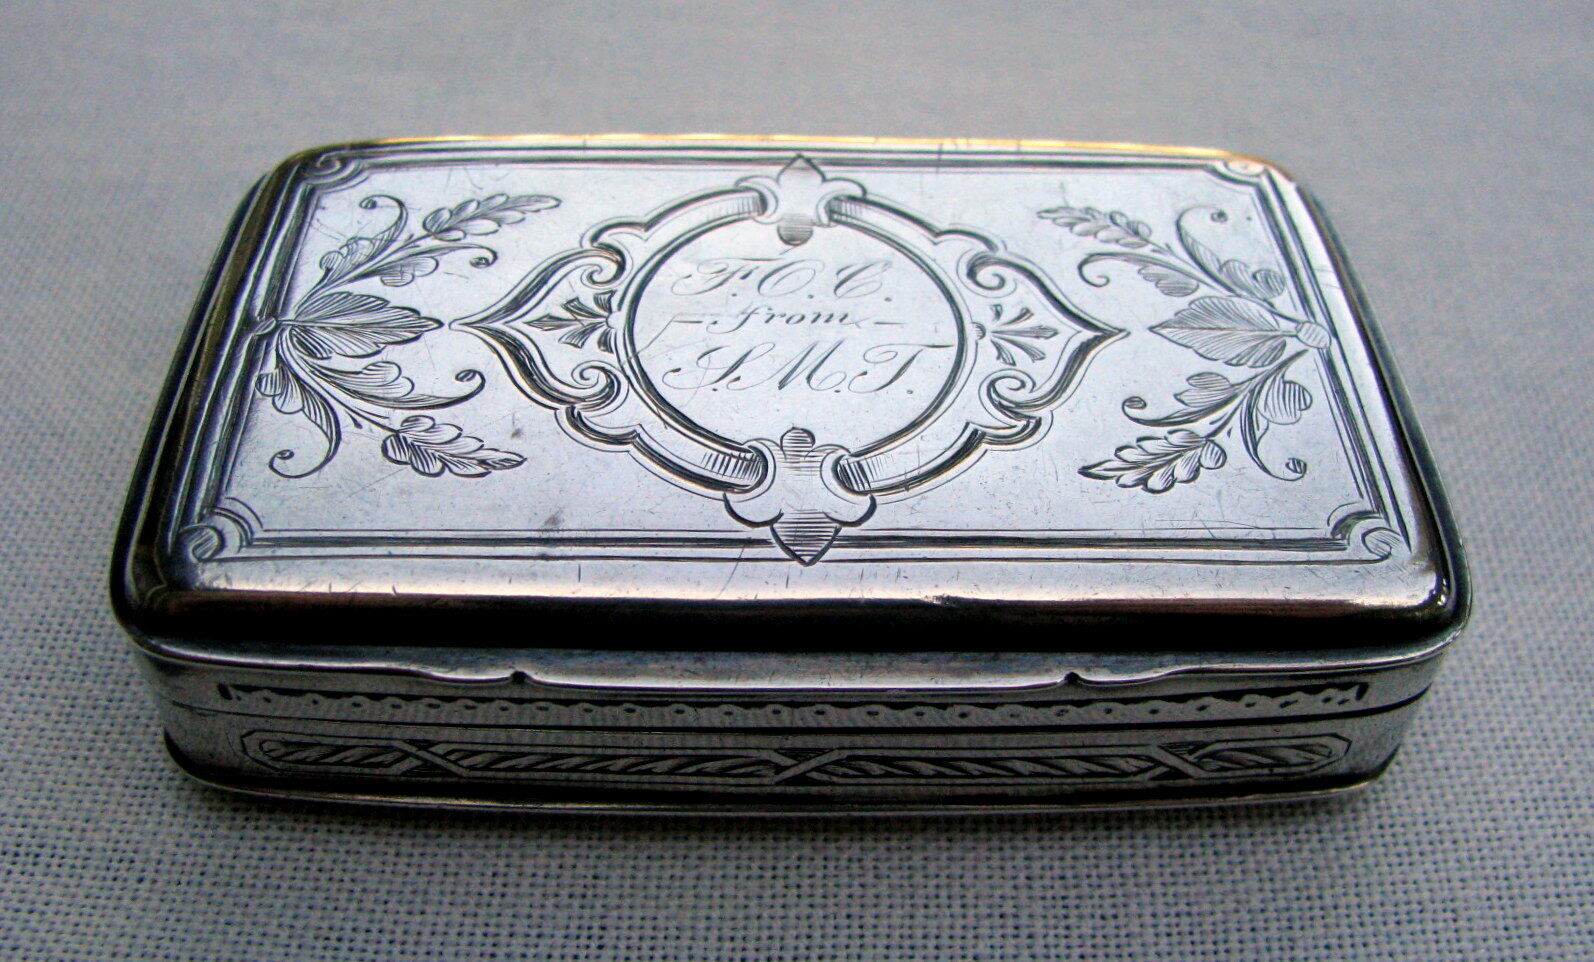 RARE EARLY ALBERT COLE NEW YORK FINE STERLING SILVER ENGRAVED SNUFF BOX 1835-75